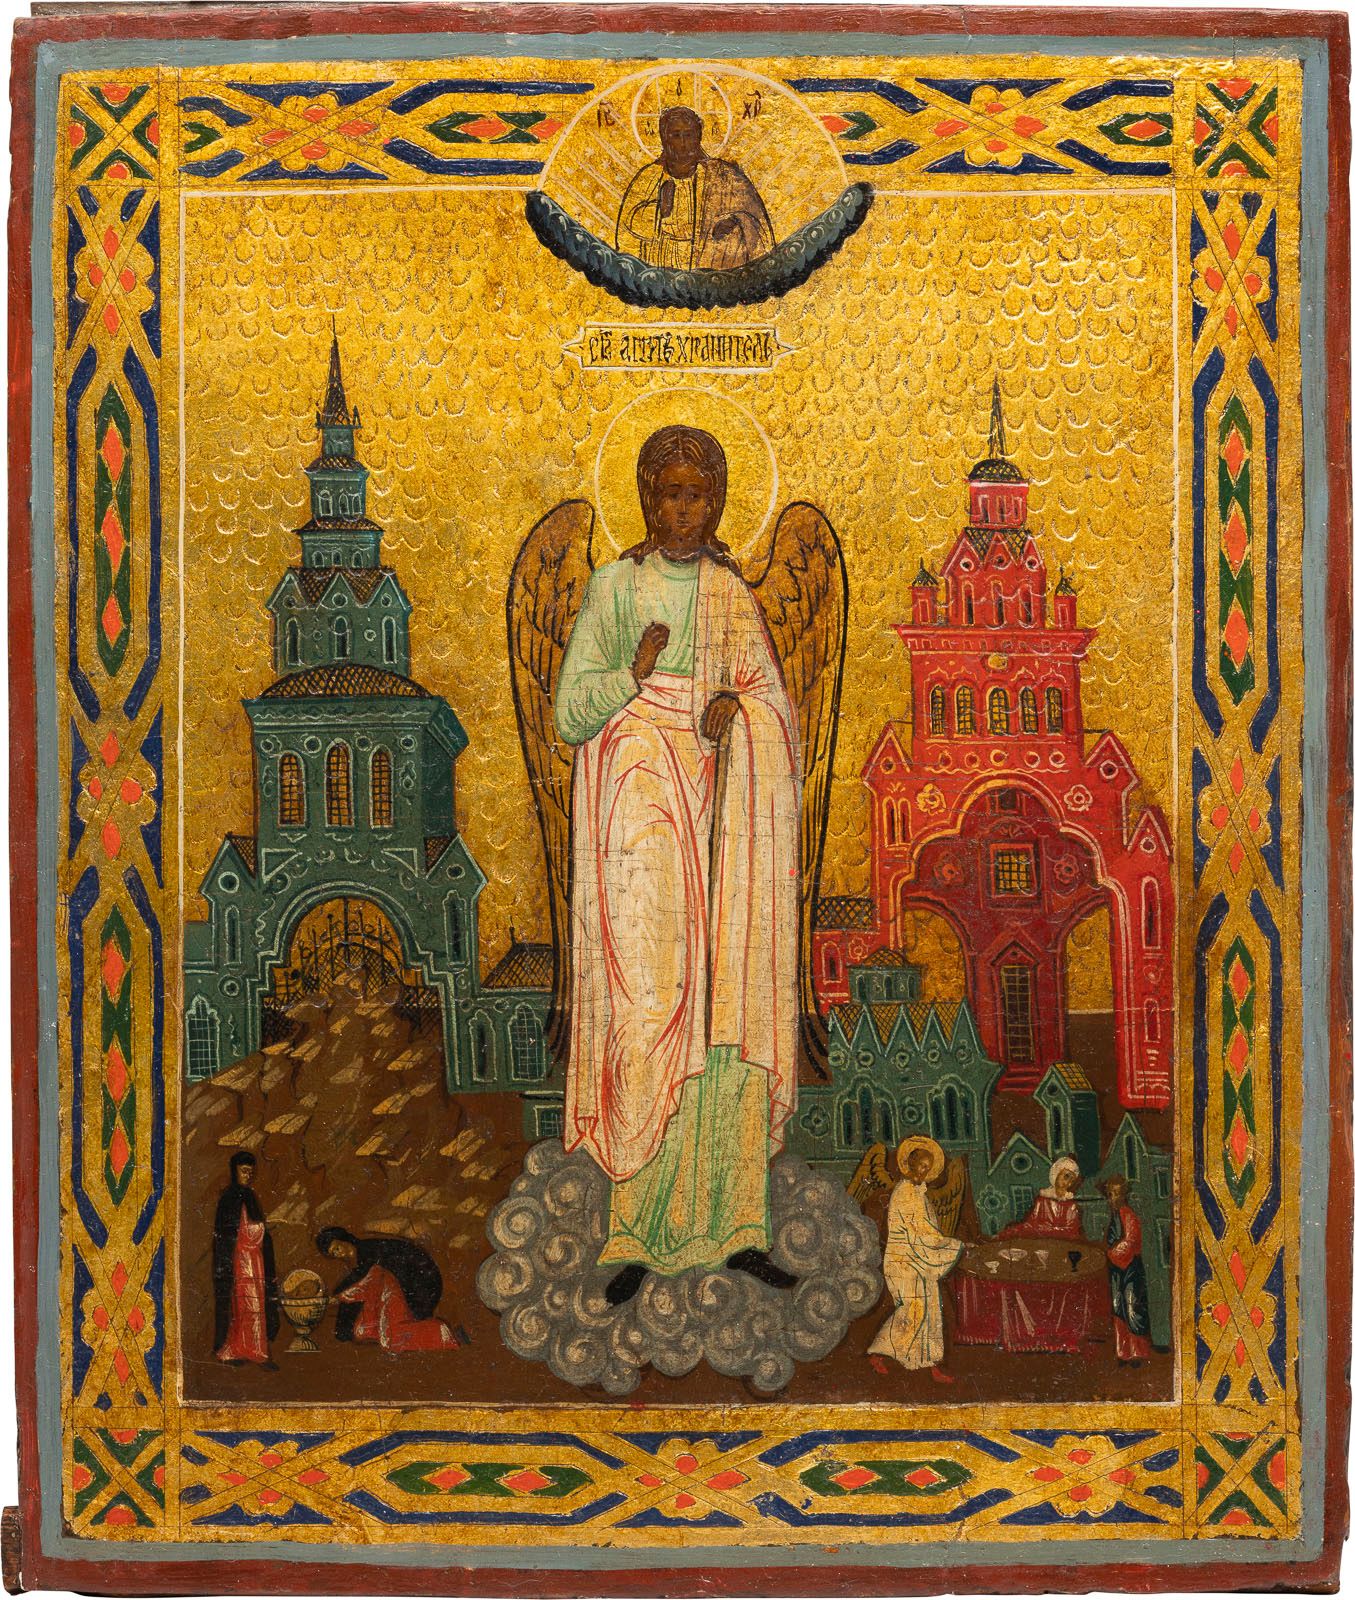 AN ICON SHOWING THE GUARDIAN ANGEL (ST. JOHN THE FORERUNNER 显示守护天使的圣像（圣约翰） 俄罗斯，约&hellip;